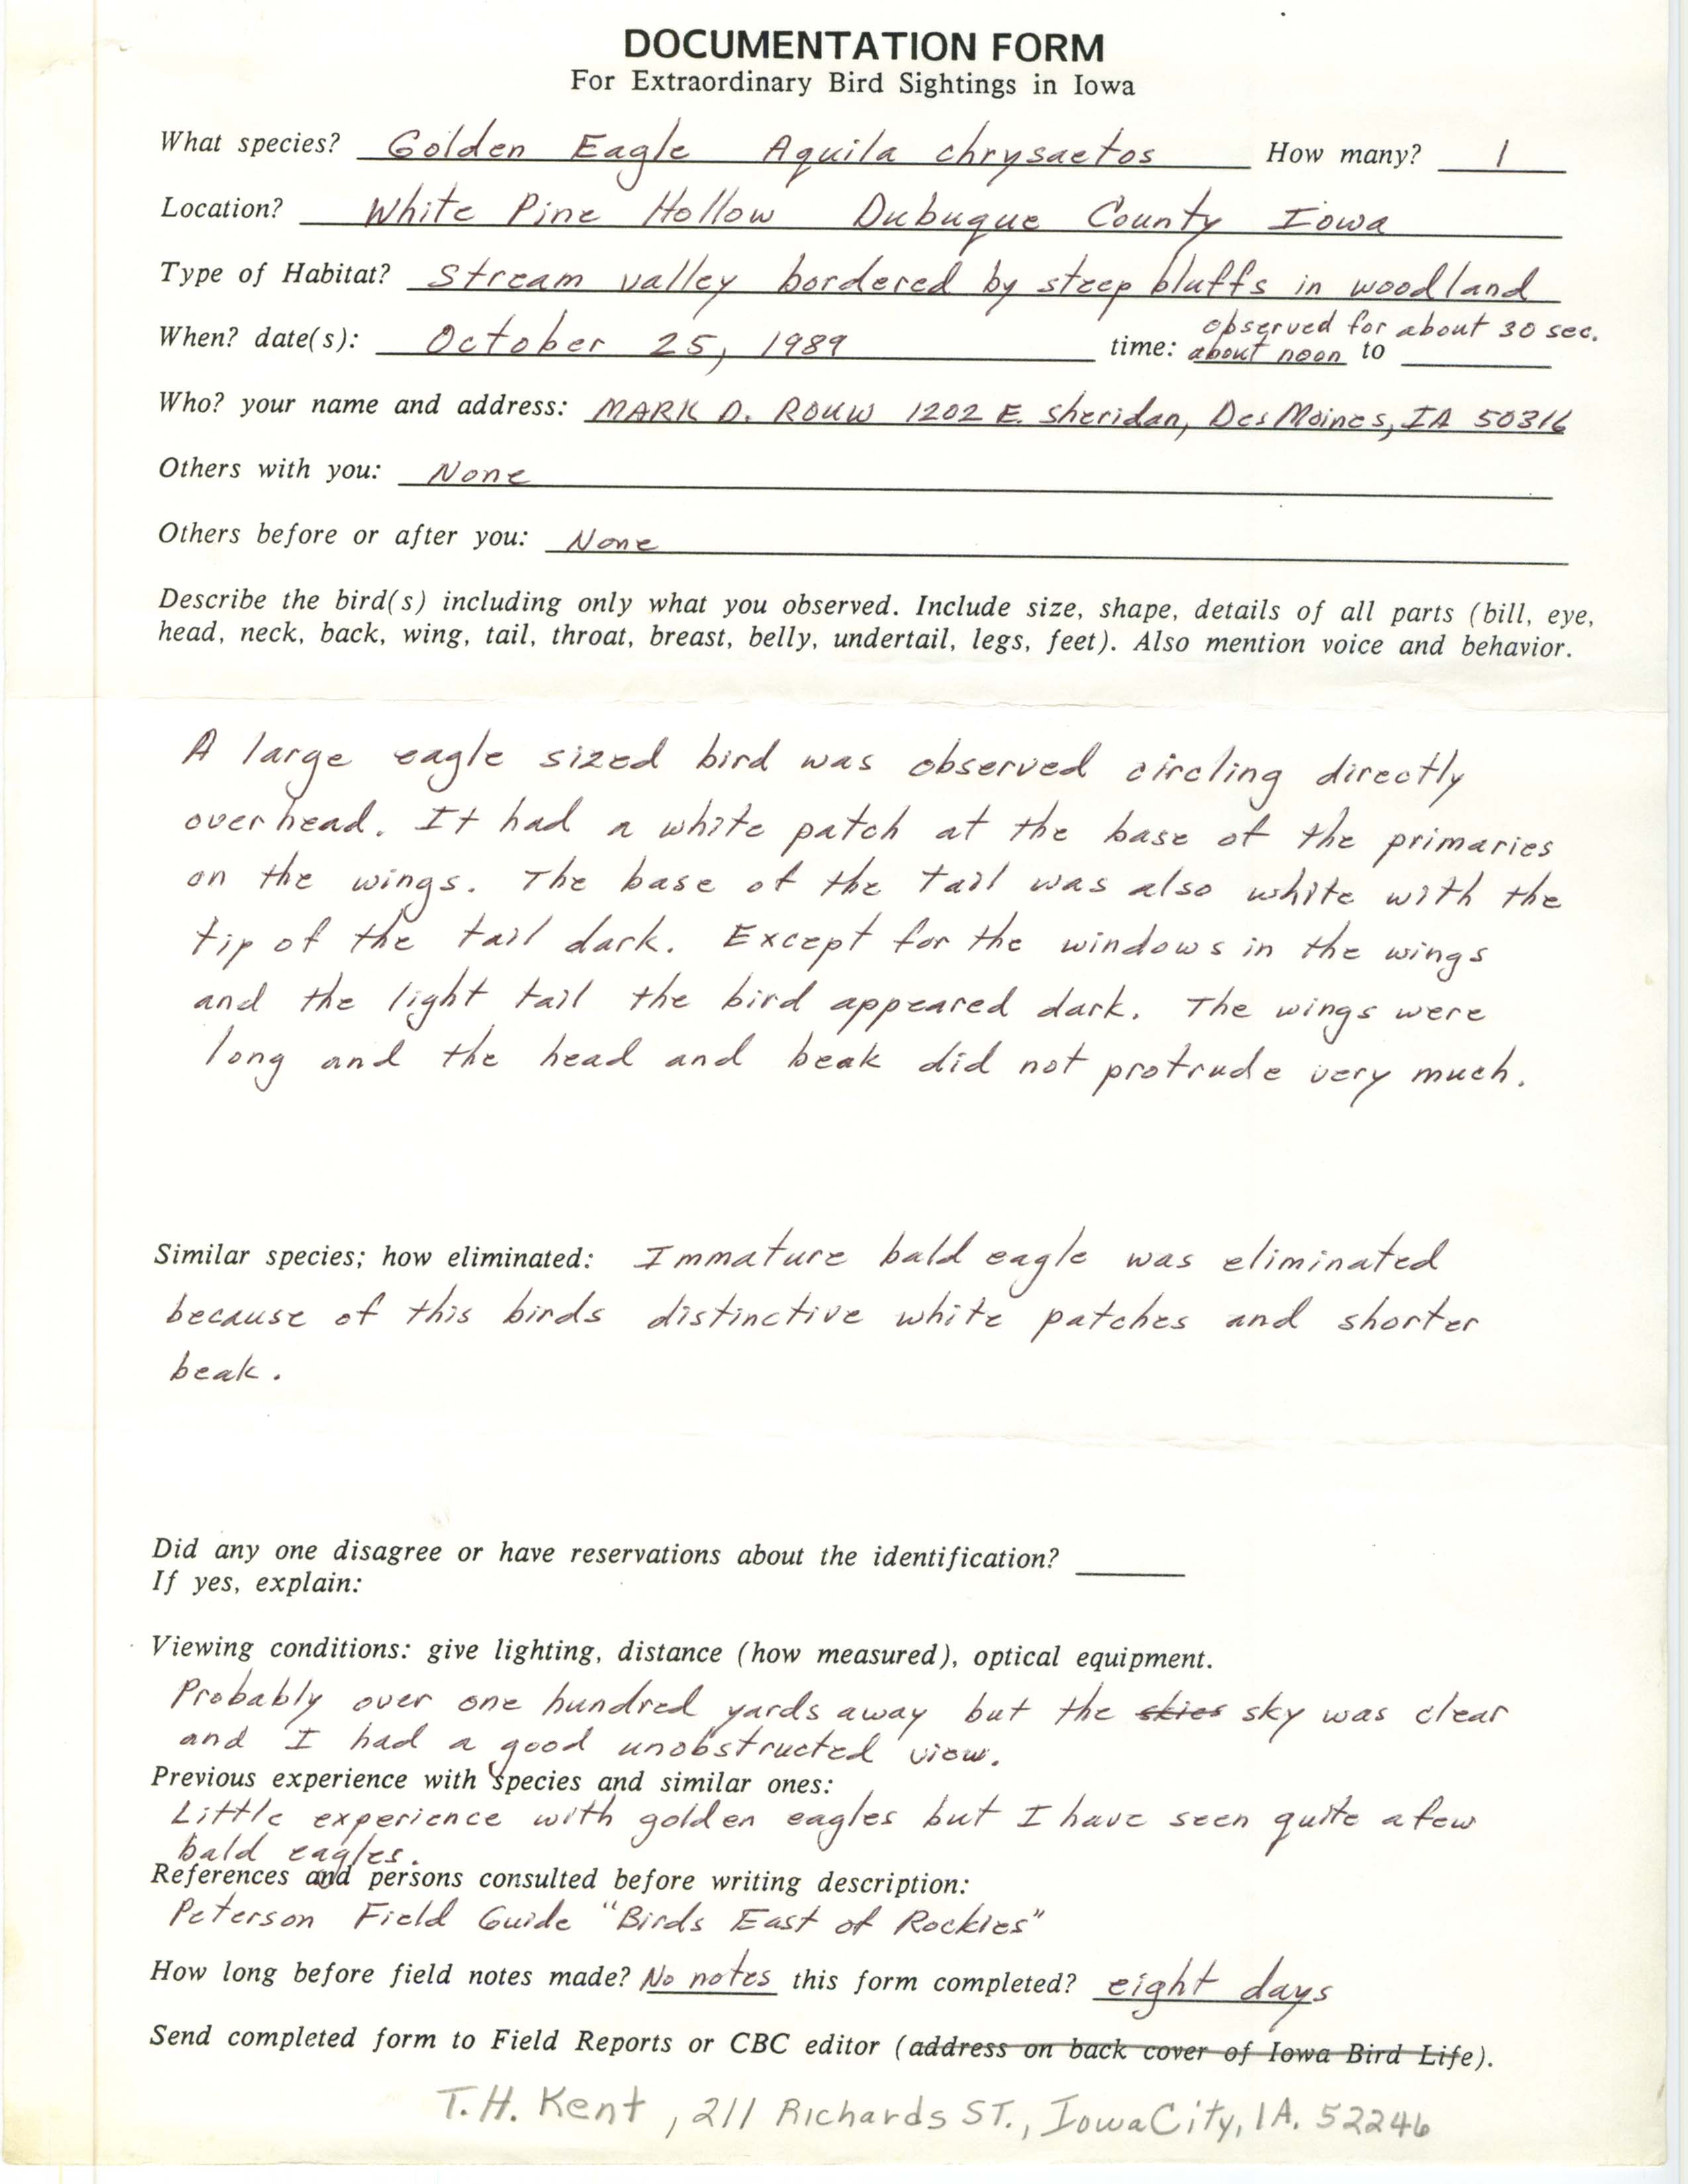 Rare bird documentation form for Golden Eagle at White Pine Hollow, 1989